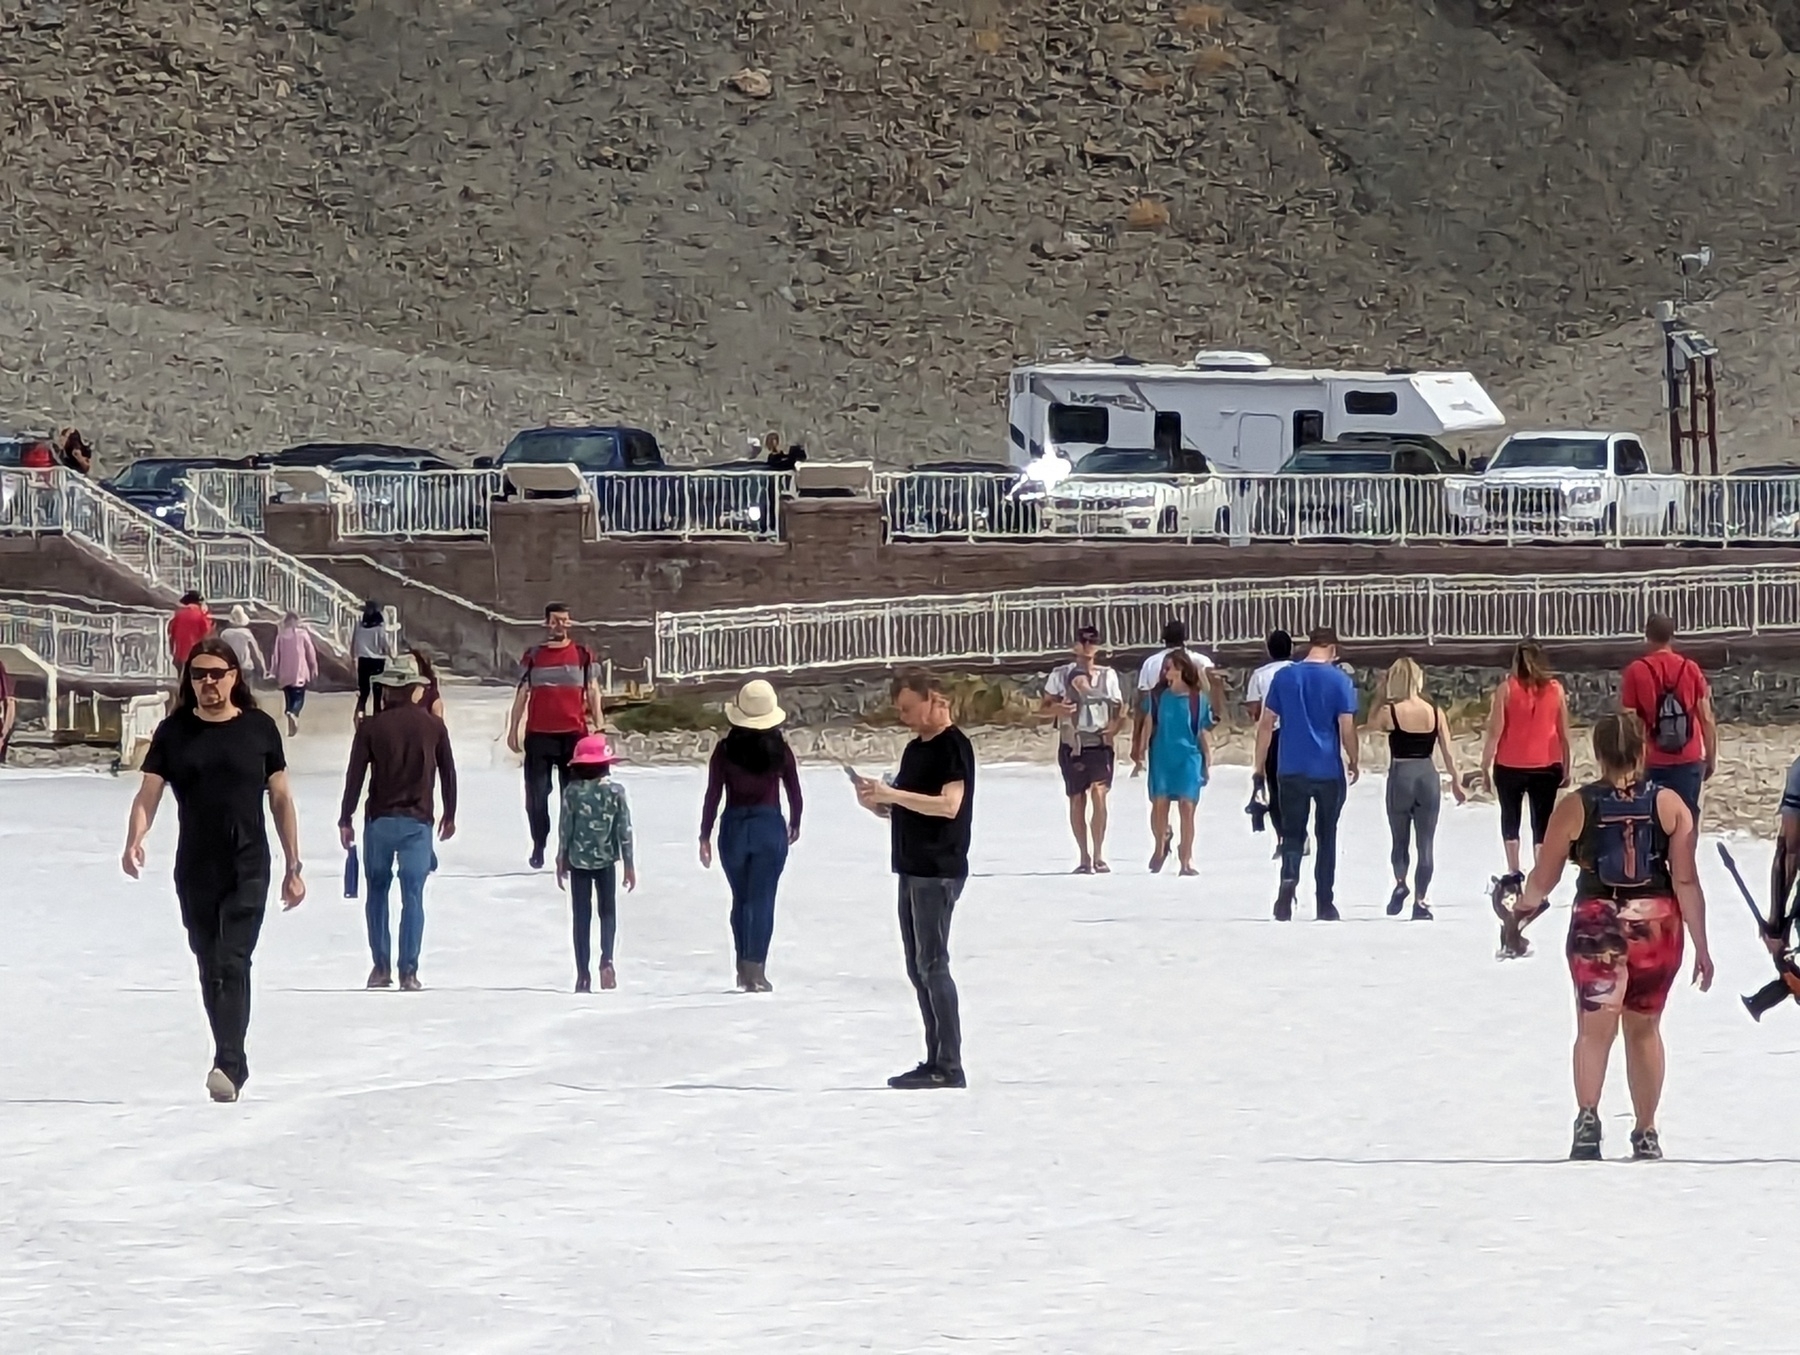 Several dozen people clad in casual clothing walk in warm air and bright sunshine along a salt whitened stretch of open space near a fenced off parking lot full of cars and recreational vehicles Wednesday, March 14, 2023 at Badwater Basin in Death Valley National Park in Death Valley, California. The day's temperatures did not appear to exceed 25 degrees Celsius, or about 76 degrees Fahrenheit.